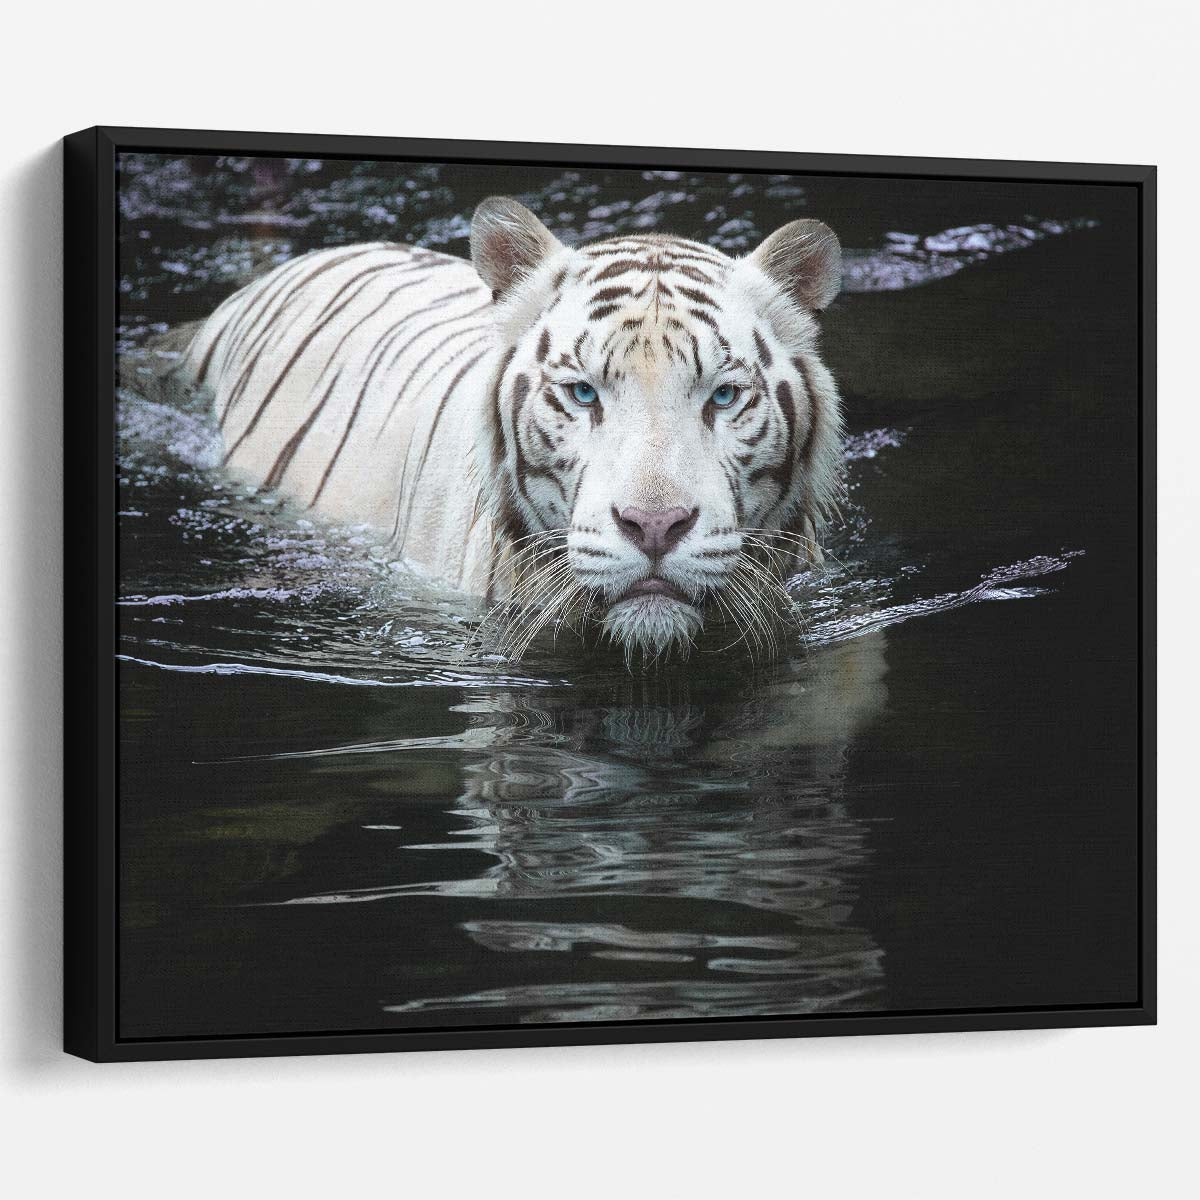 Intense Gaze White Tiger Bathing Wall Art by Luxuriance Designs. Made in USA.